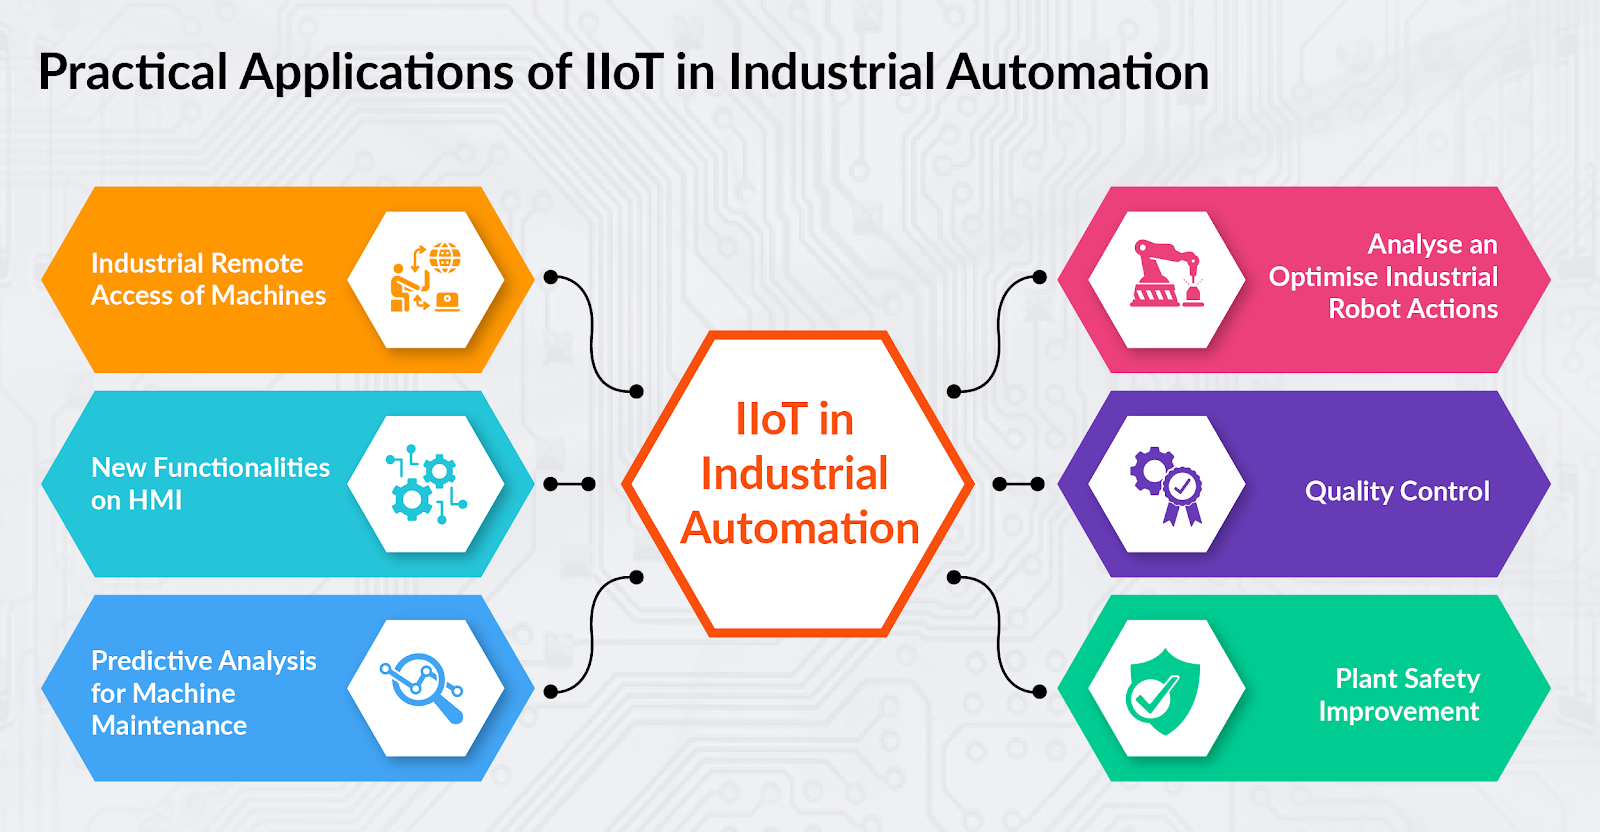 Practical Application of IIot in Industrail Automation